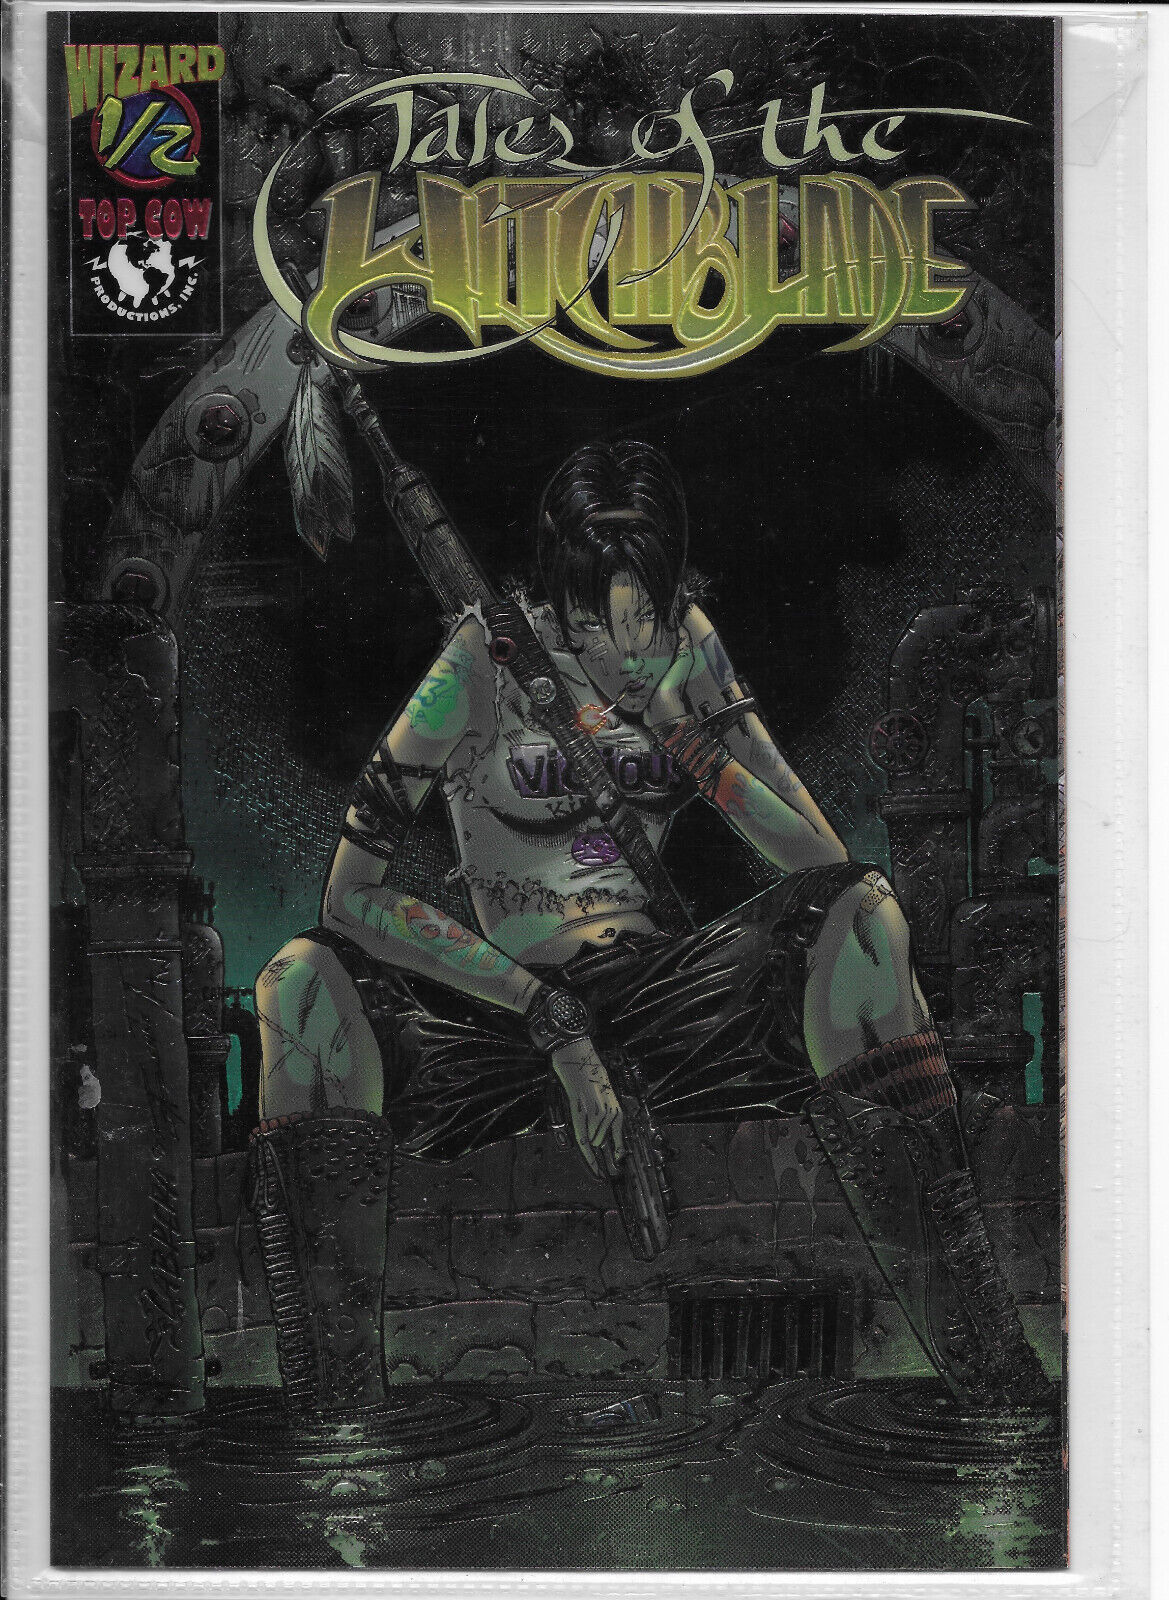 Tales of the Witchblade #1/2-B Chromium Image/Top Cow Wizard mail away excl CoA